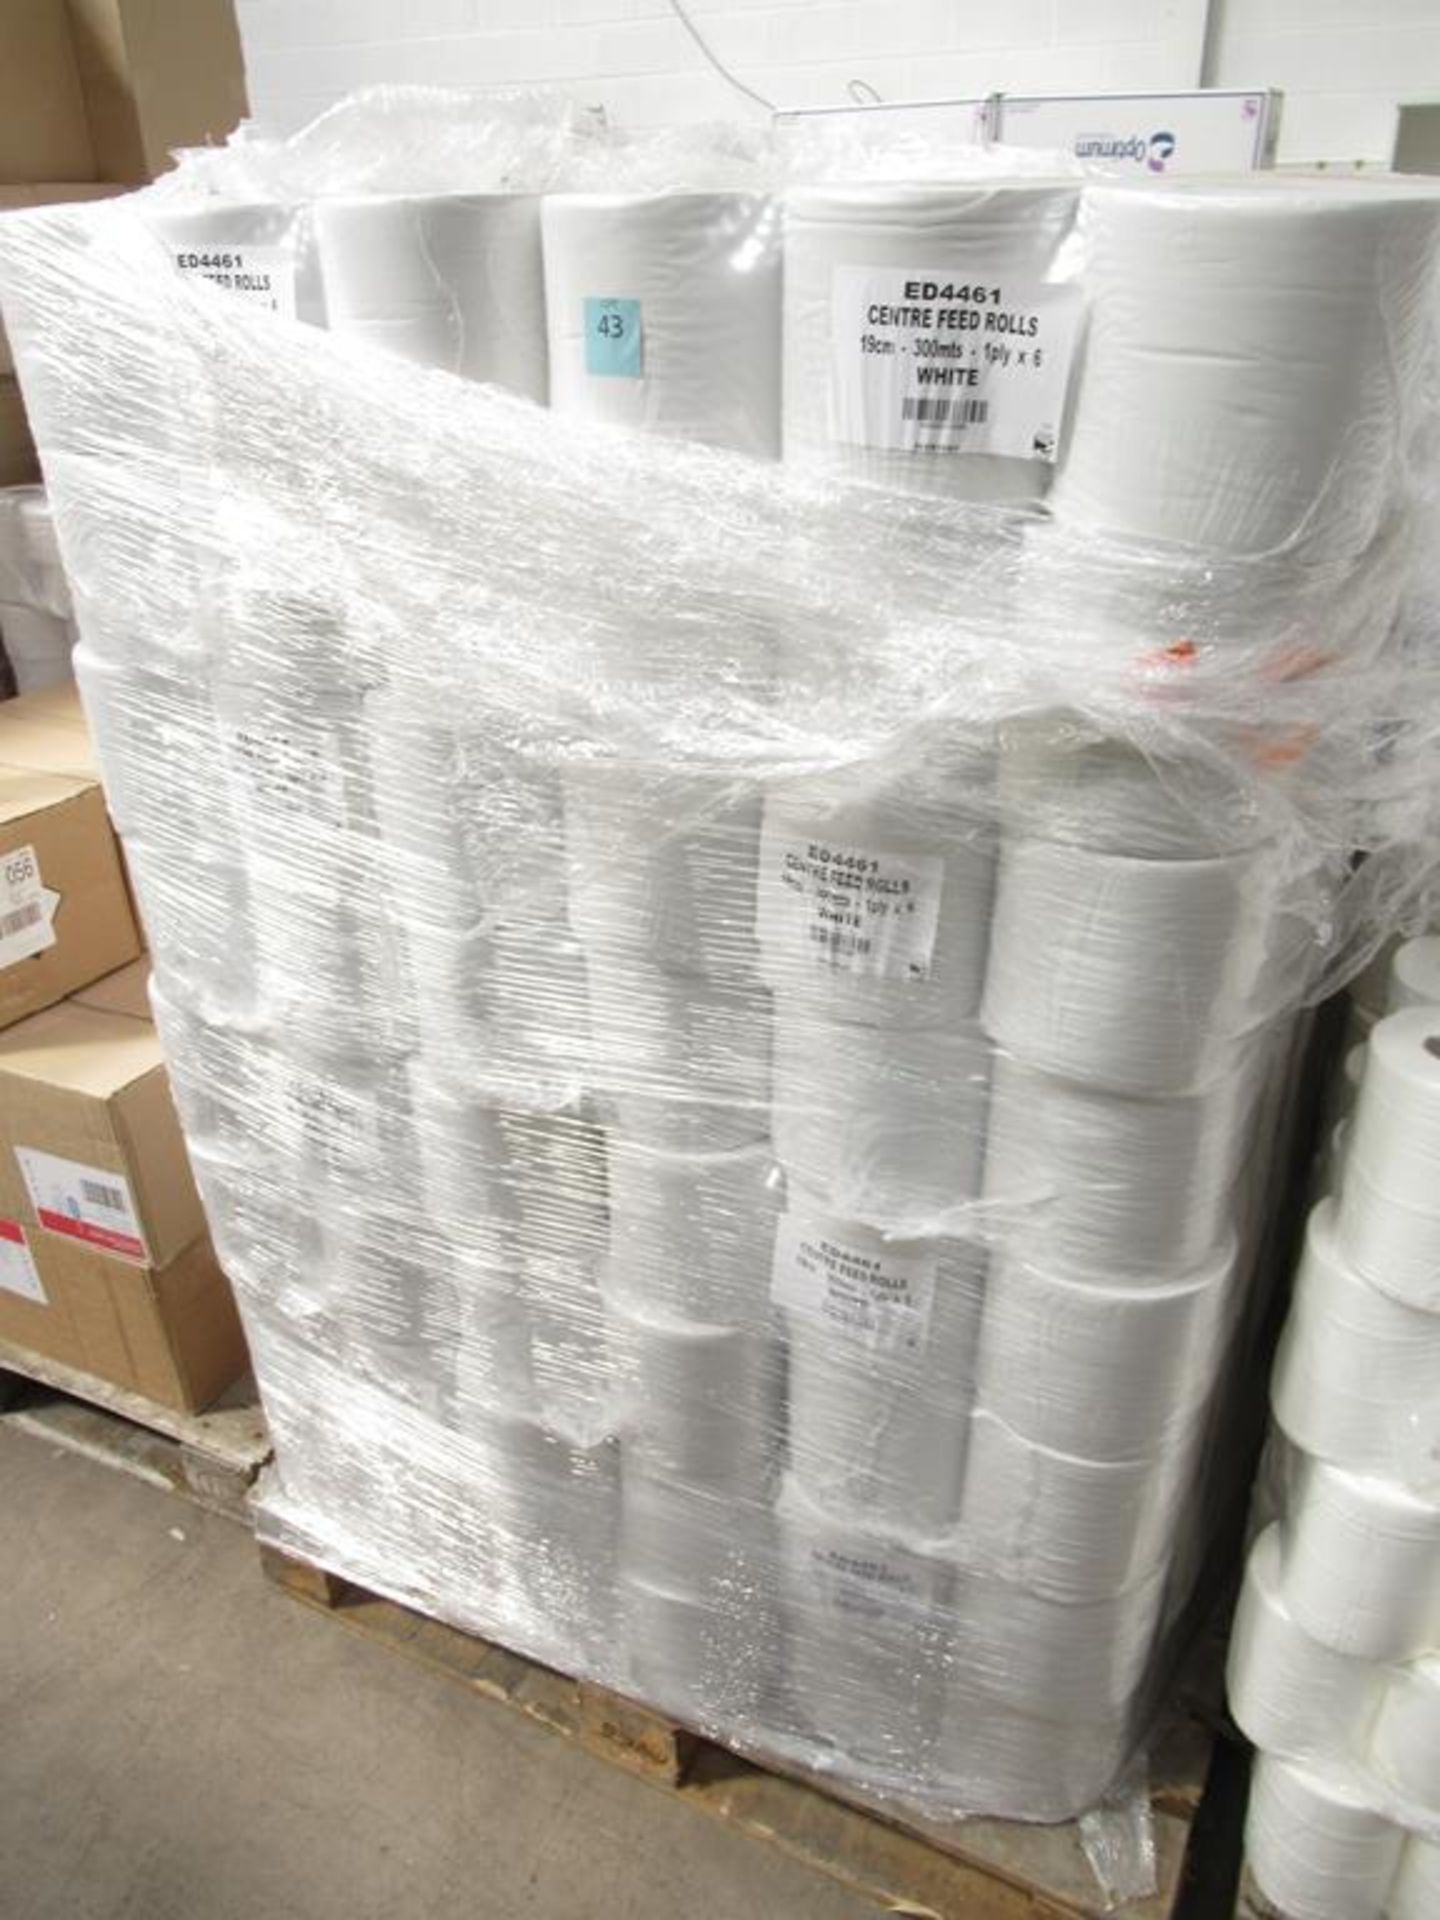 Pallet to contain 39 packs of Grey Centre Feed Rolls (6 rolls per pack)